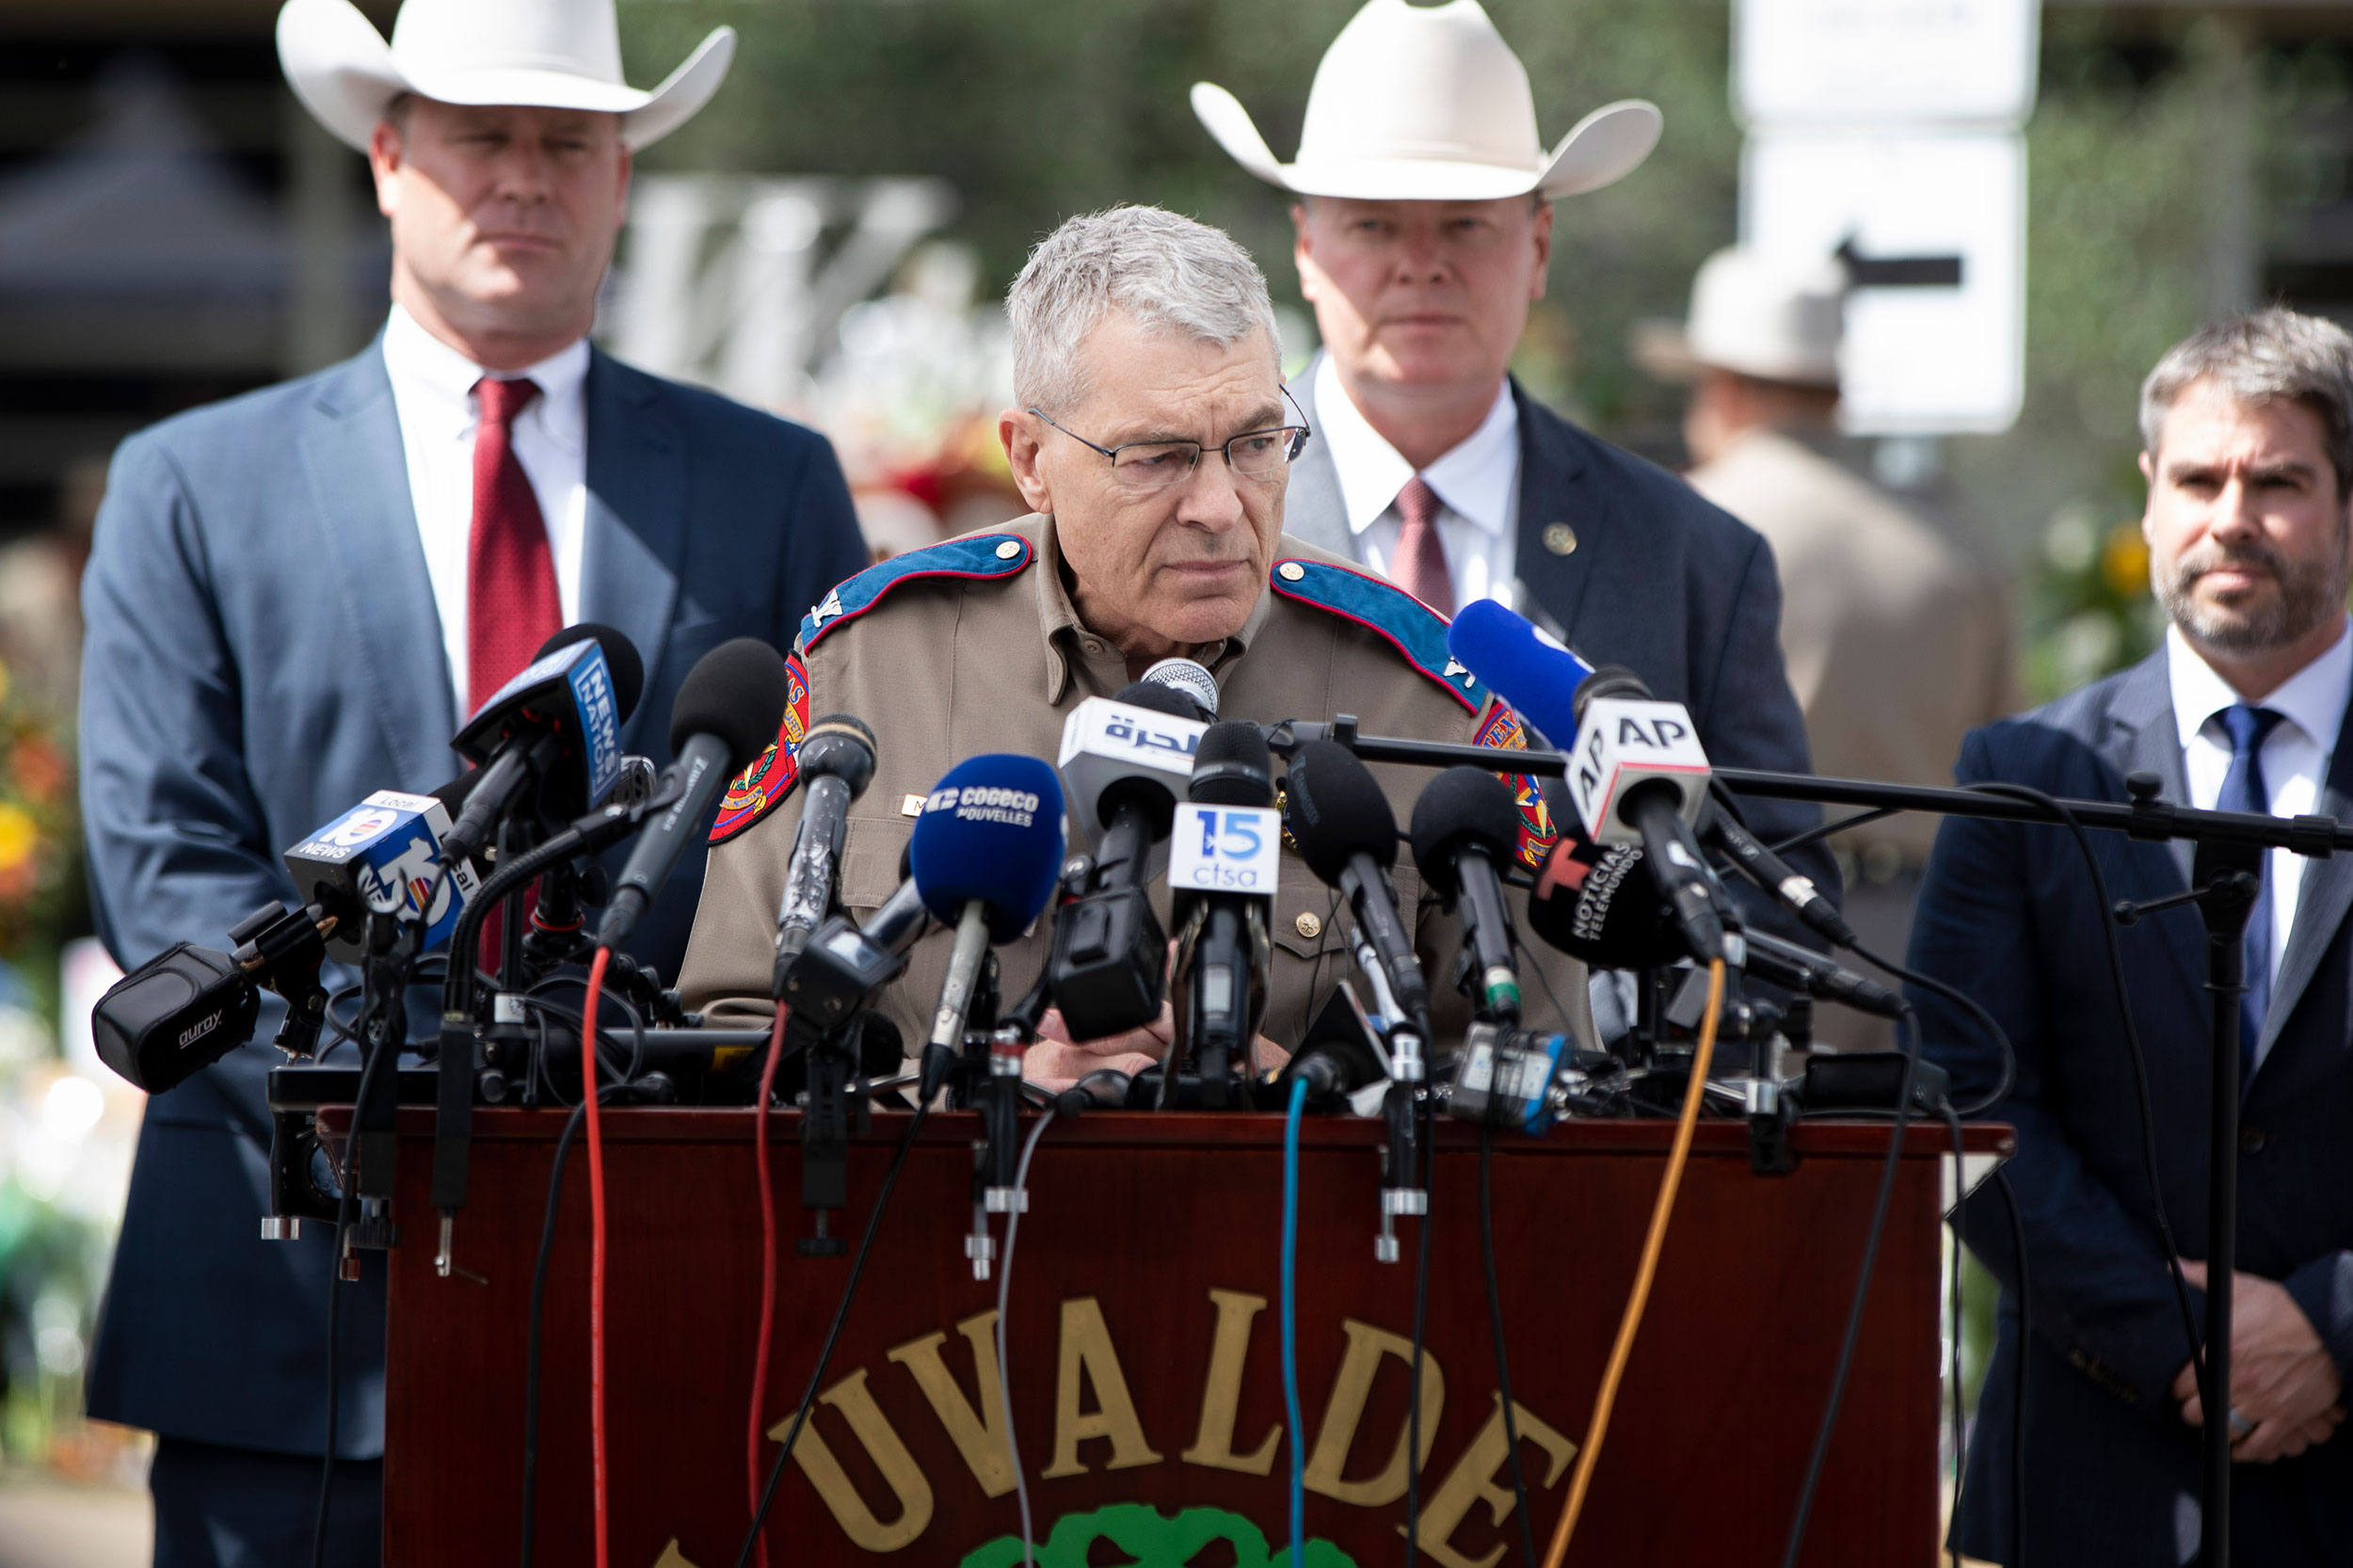 Texas Department of Public Safety Col. Steven McCraw speaks during a press conference on Friday, May 27.